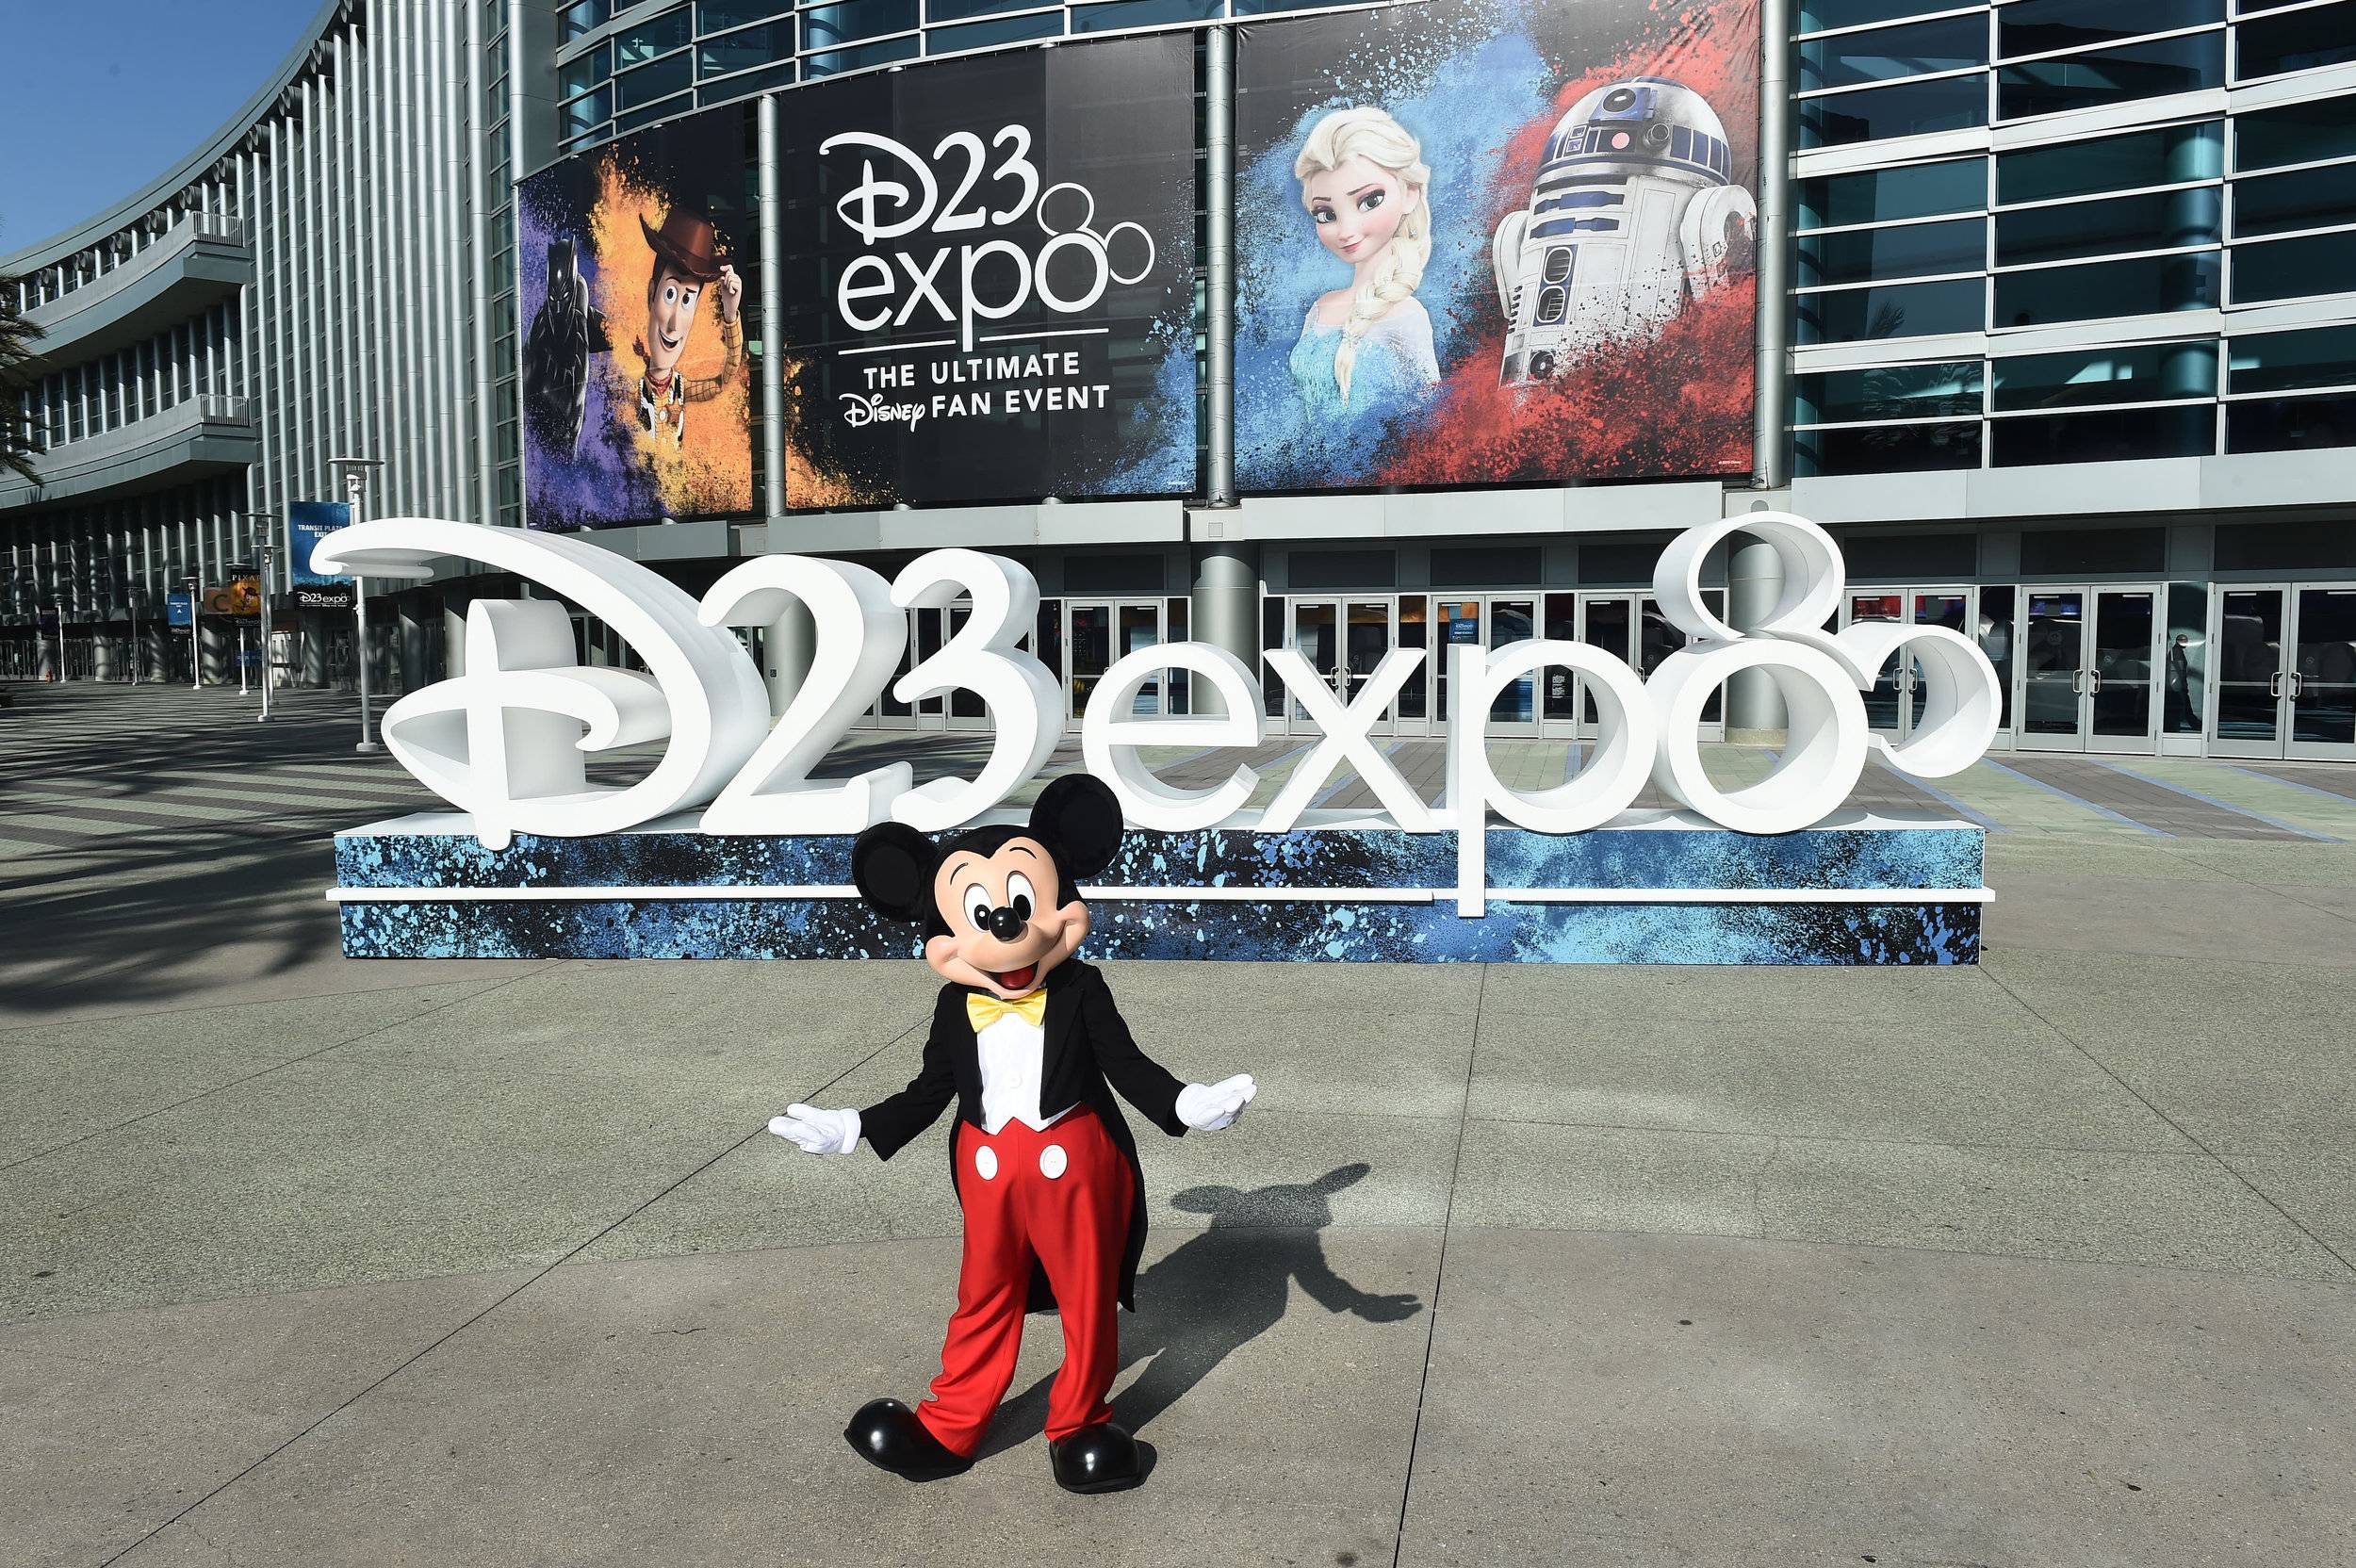 POLL - What would you like to have seen announced at D23 EXPO?